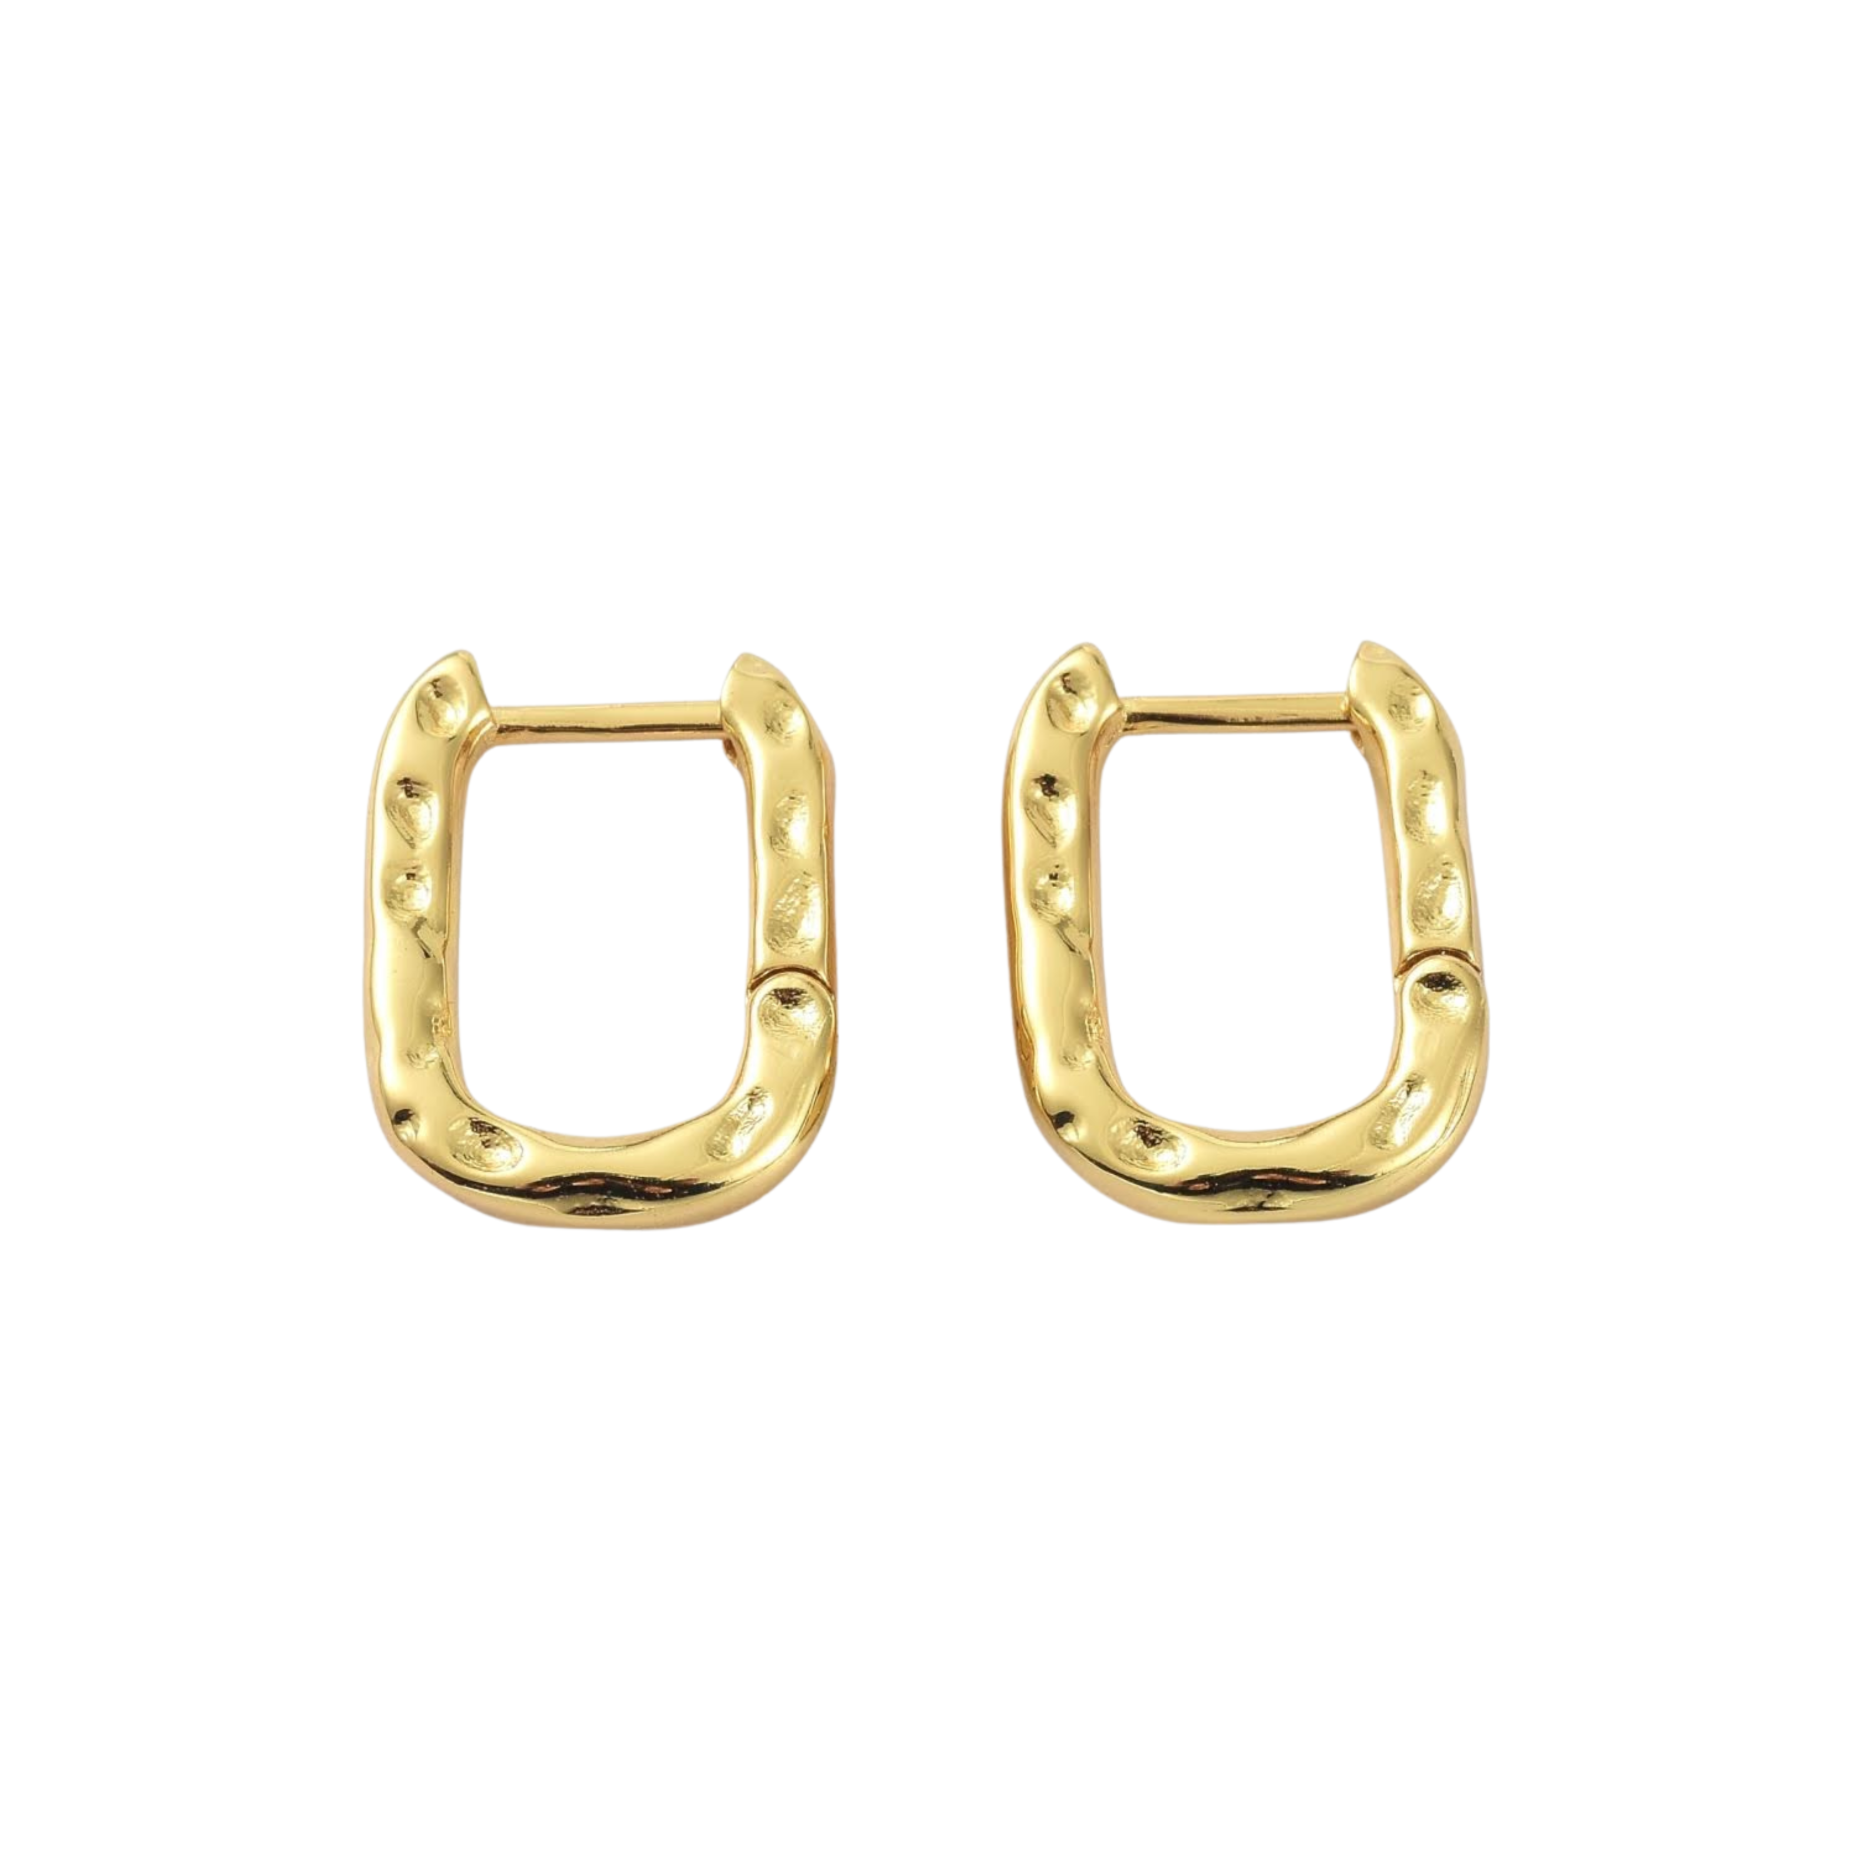 Textured Hoops in Gold and Silver